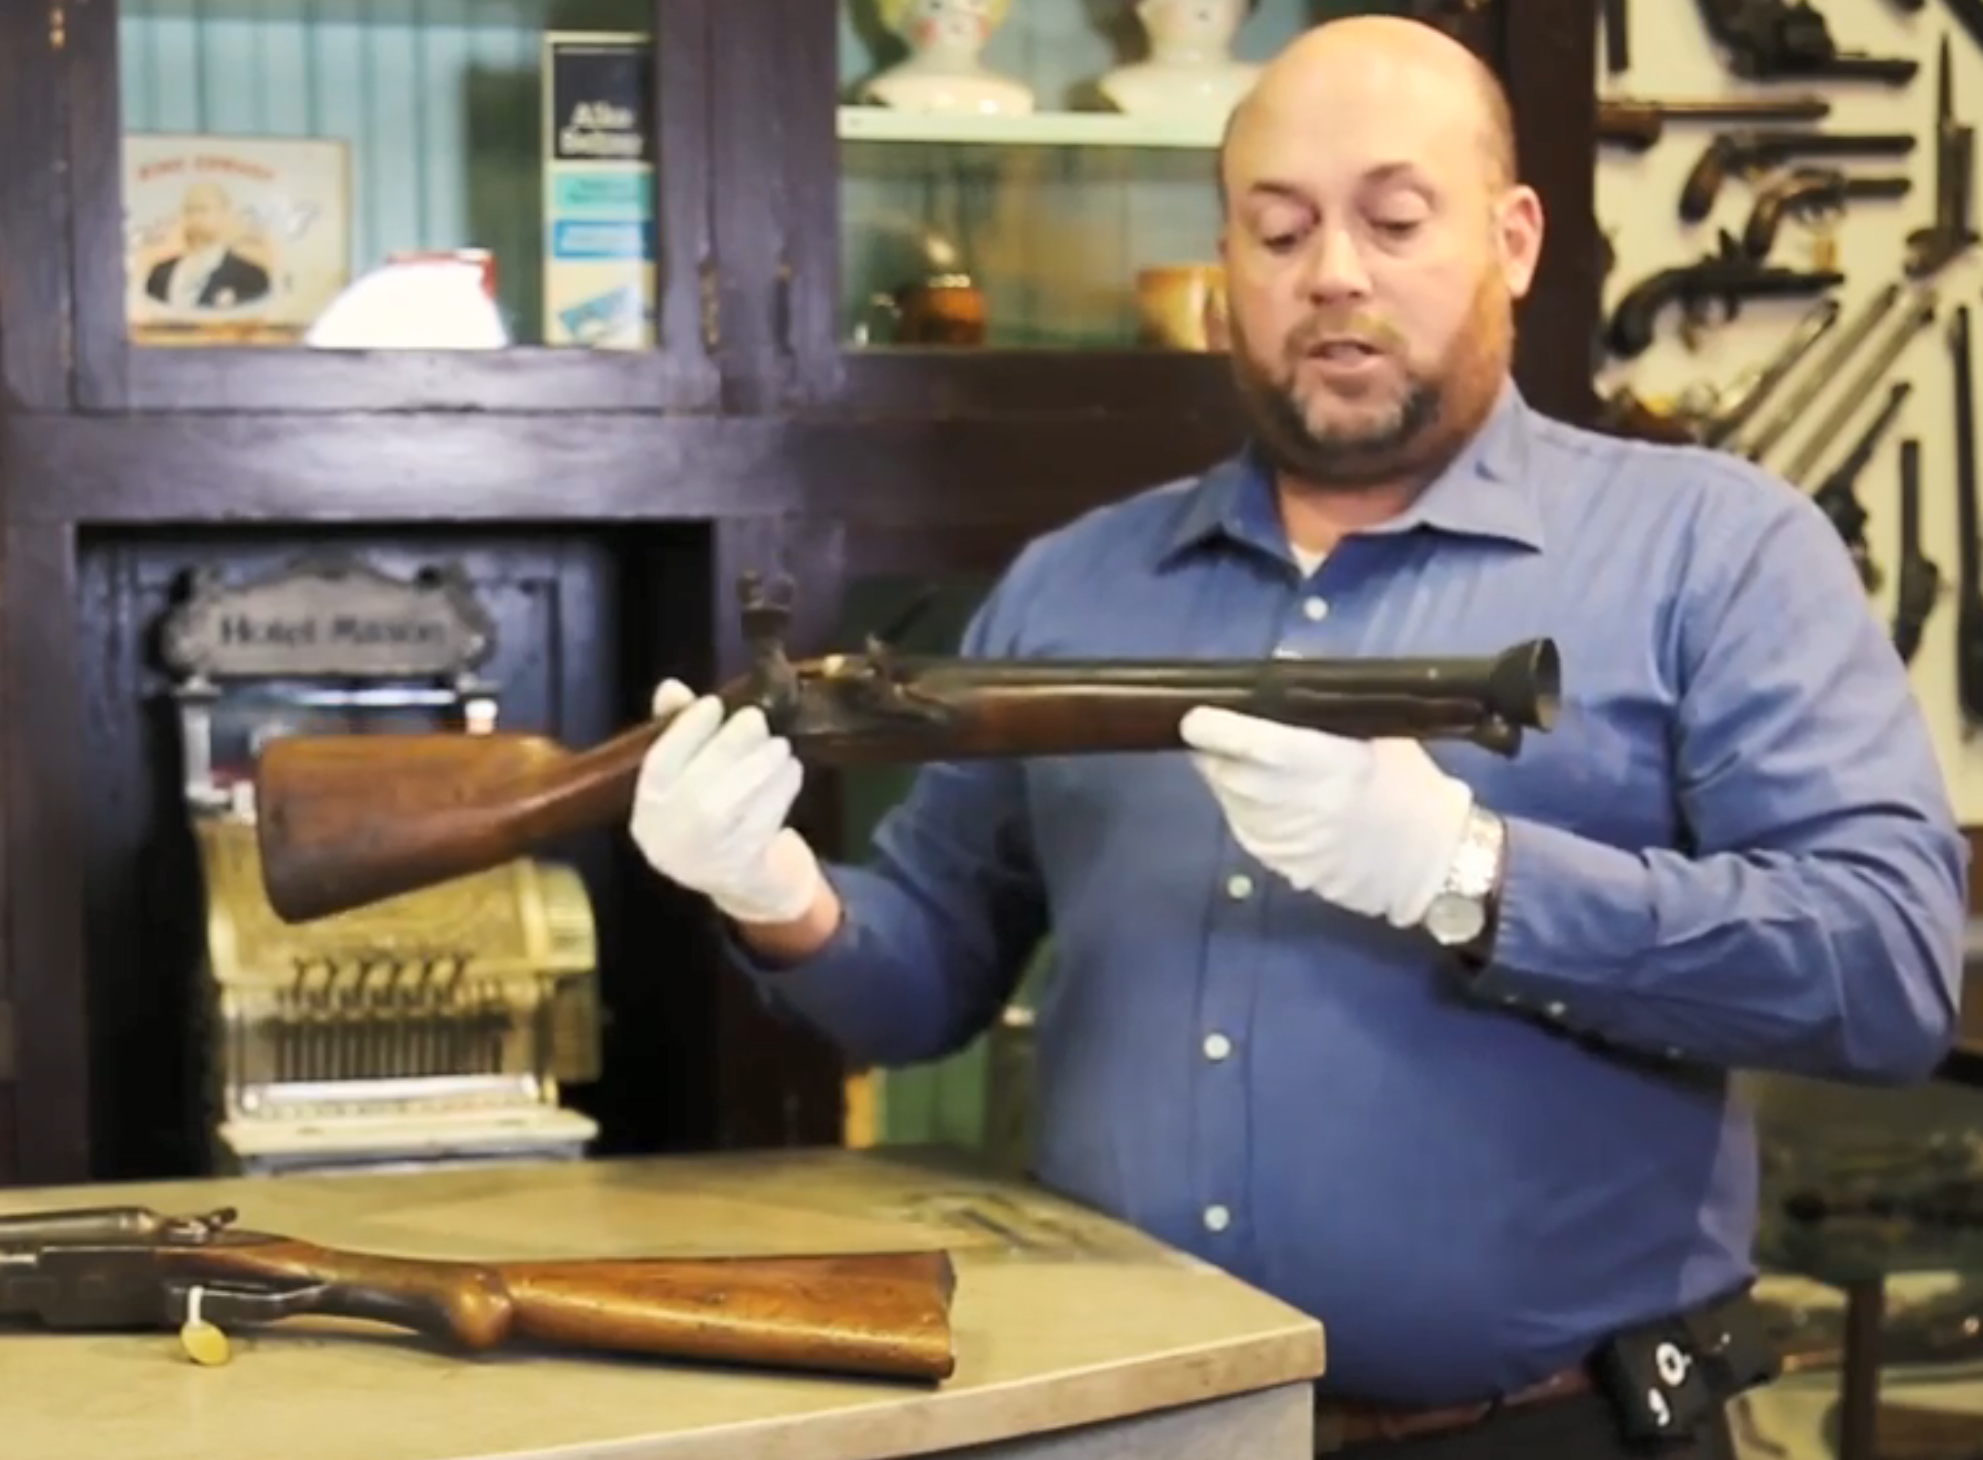 History of a Blunderbuss gun - Pirate rifles, muskets and other weapons